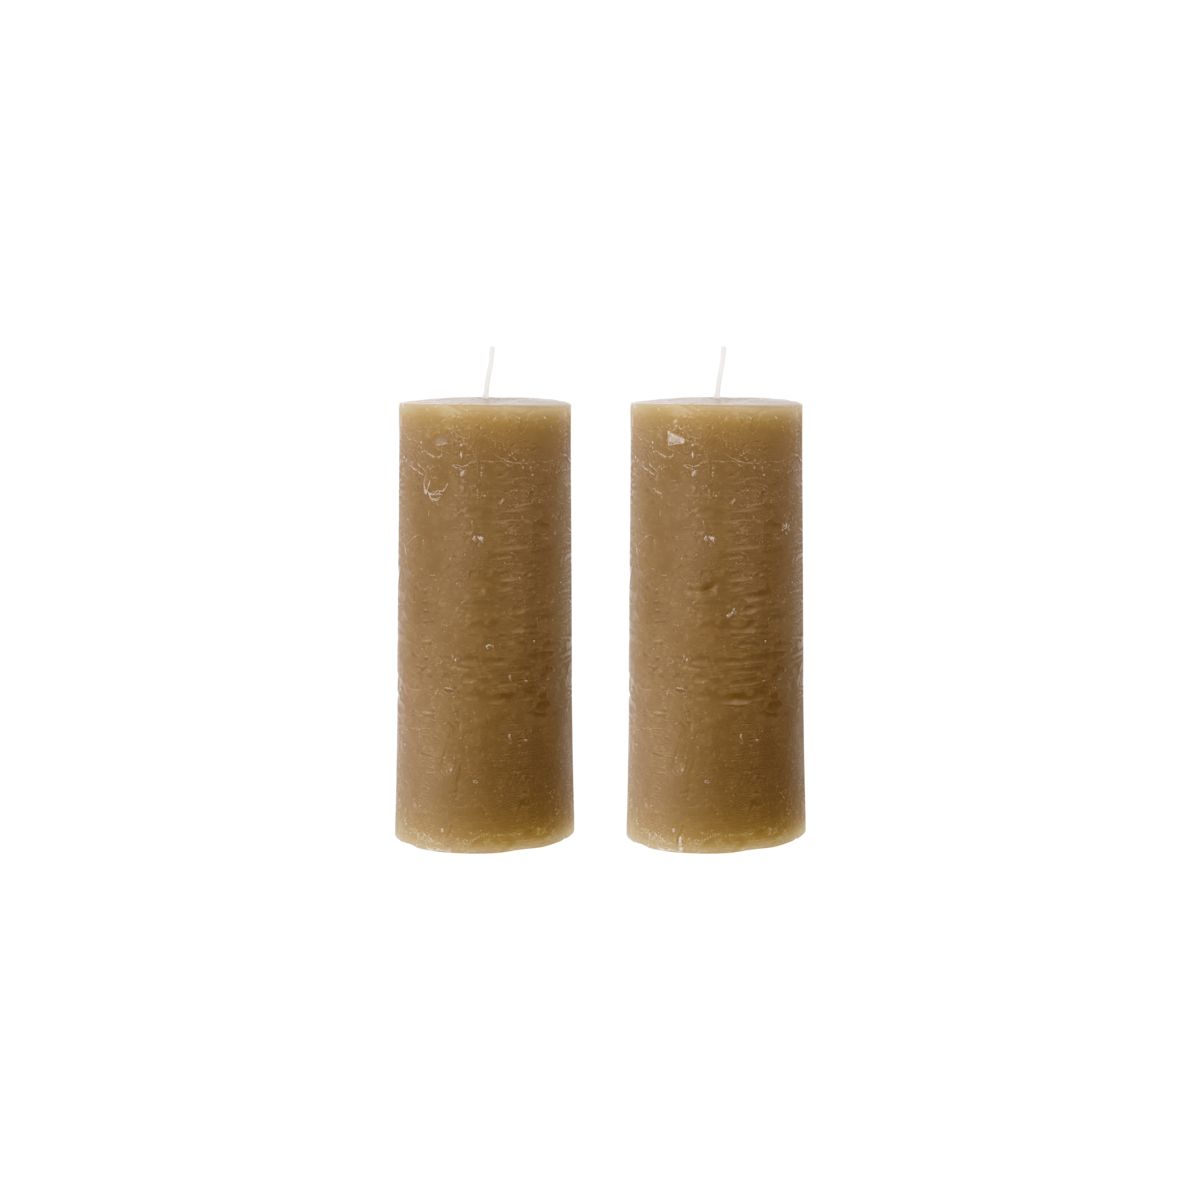 House Doctor Set of 2 Large Rustic Wax Pillar candles in Camel